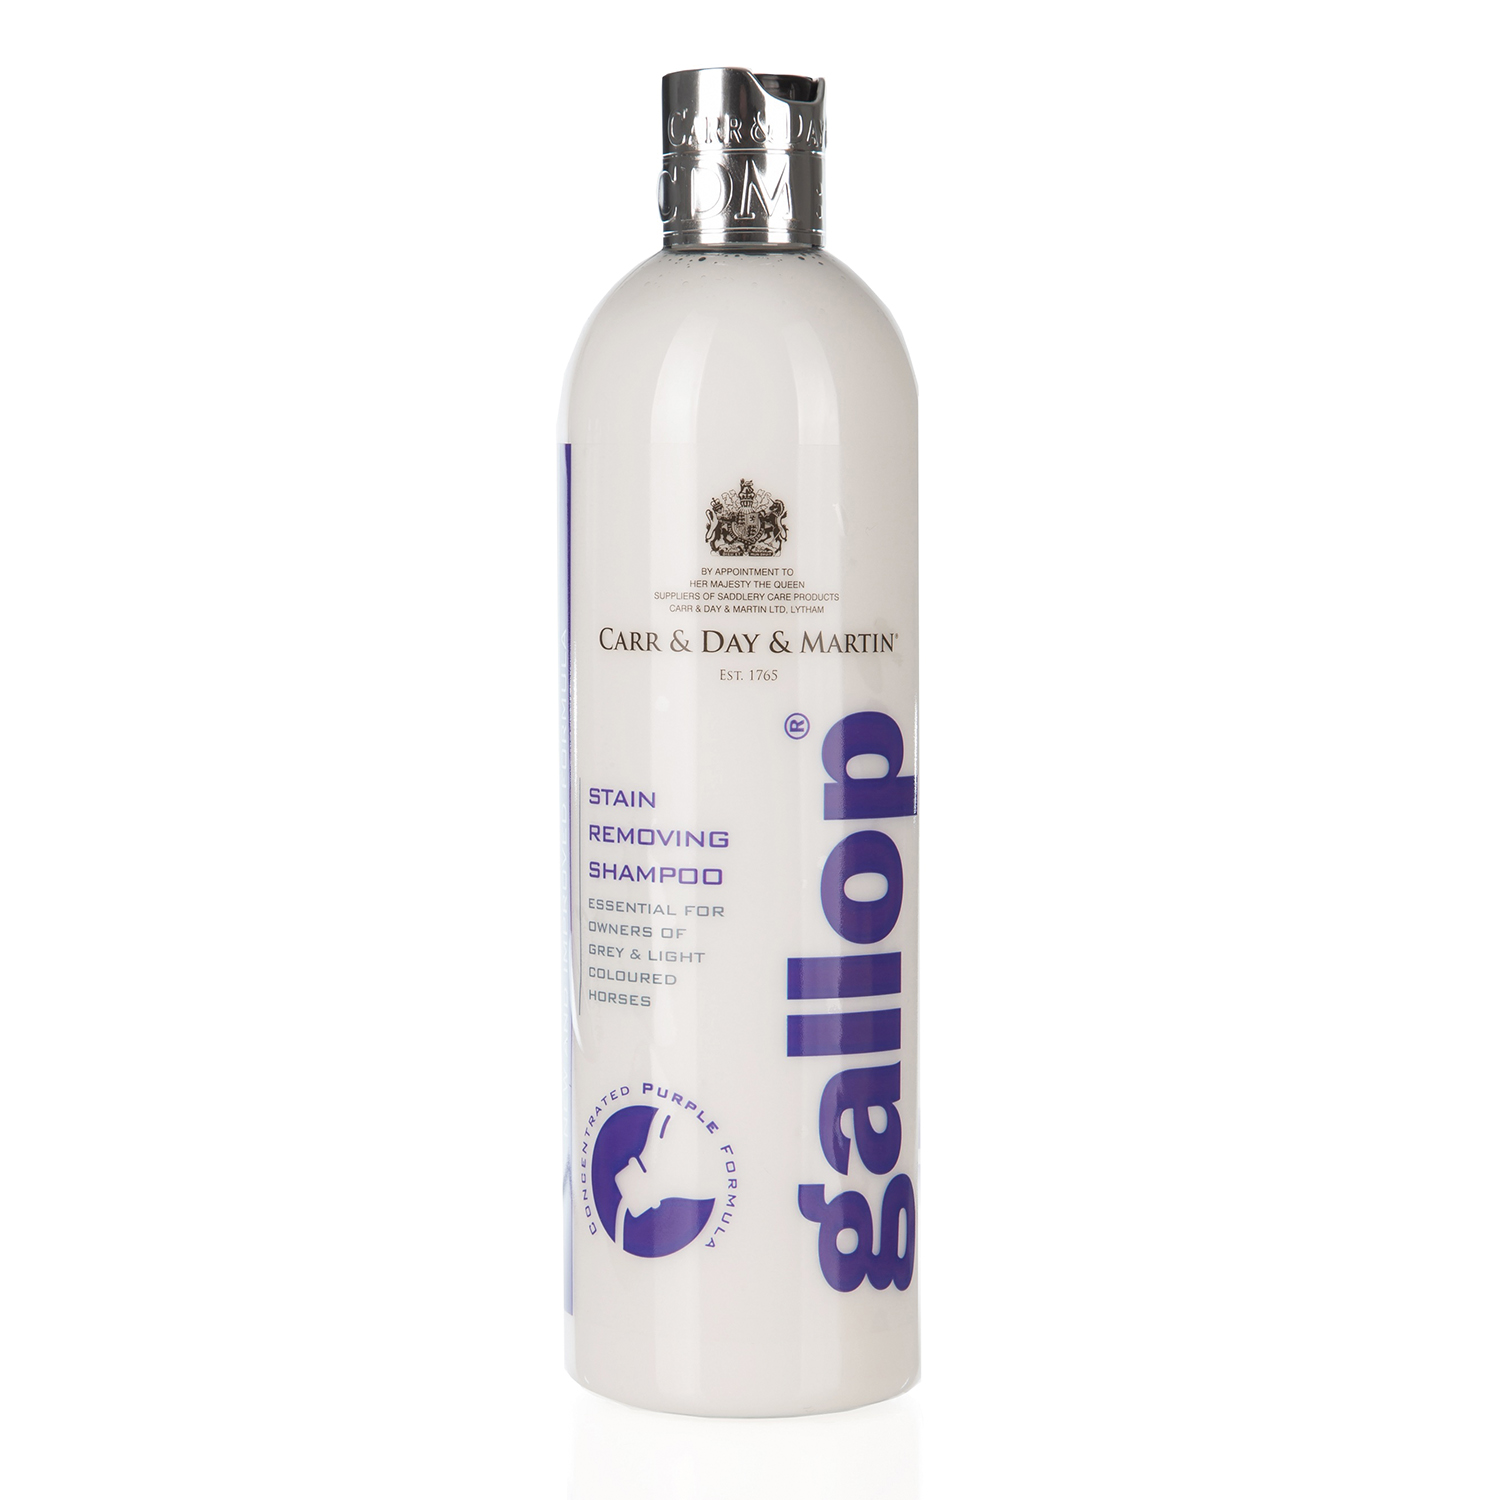 CARR & DAY & MARTIN GALLOP STAIN REMOVING SHAMPOO 500 ML 500 ML